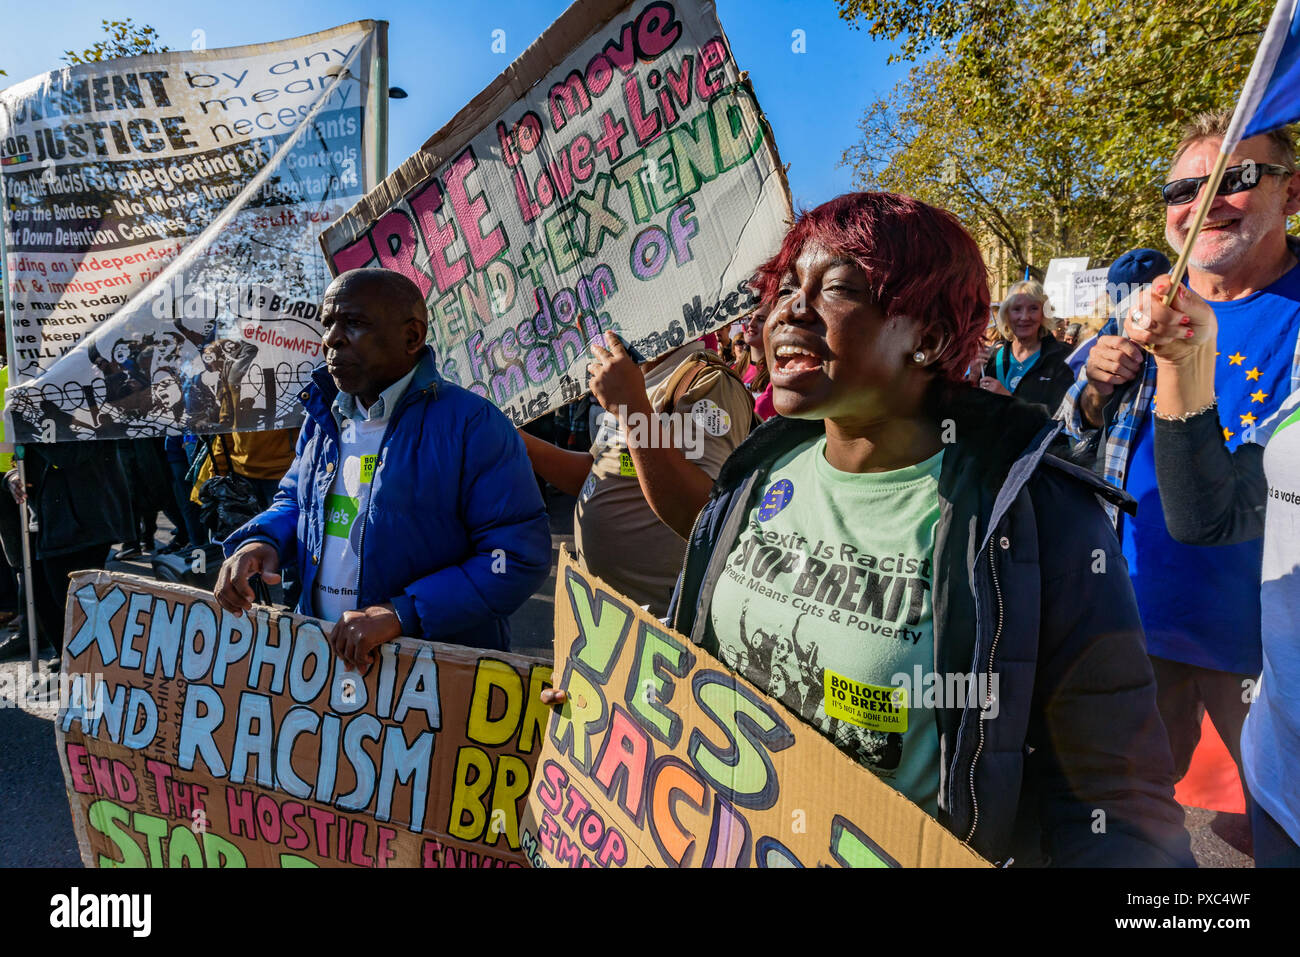 London, UK. 20th Oct 2018.  Movement for Justice protested on Piccadilly in front of the People's Vote March calling for an end to Brexit, which they is racist. They want an end to the scapegoating of immigrants and call for an end to the hostile environment which is ripping families apart, and amnesty for all those present here and to an extension of freedom of movement to include the Commonwealth. Credit: ZUMA Press, Inc./Alamy Live News Stock Photo